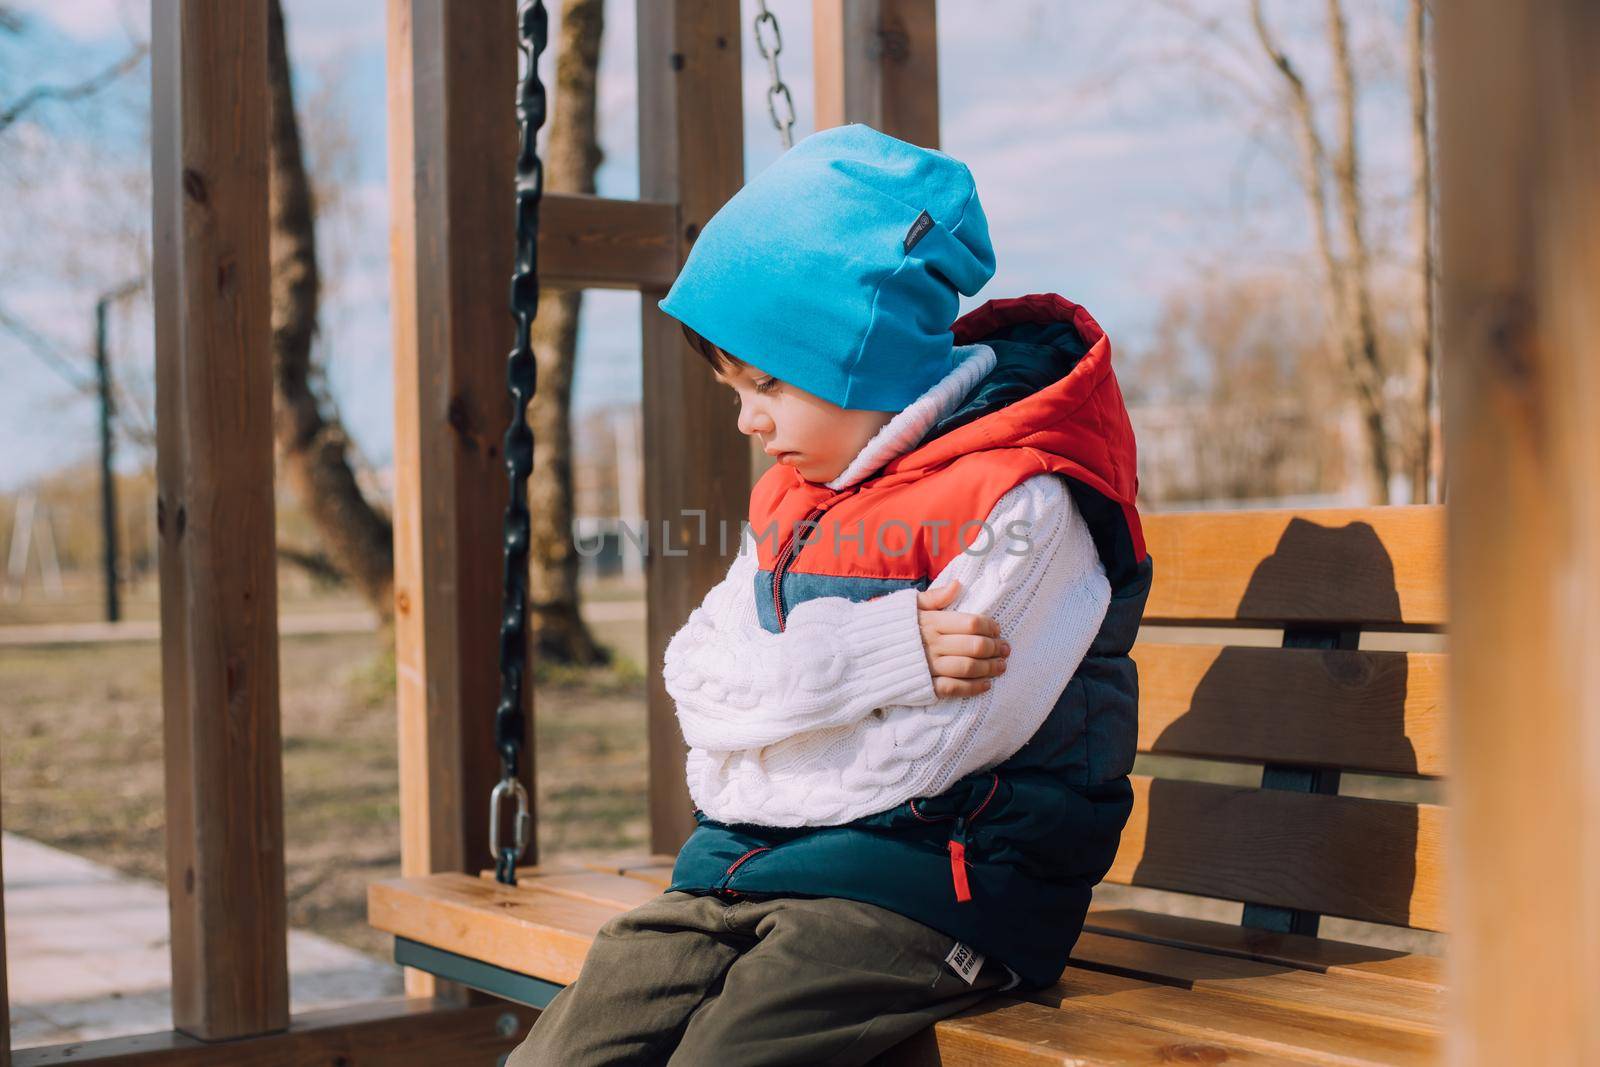 The offended boy is sitting on a lifestyle bench . Childish grievances. Childish anger. An article about children's emotions. An article about the psychology of children. Transitional age